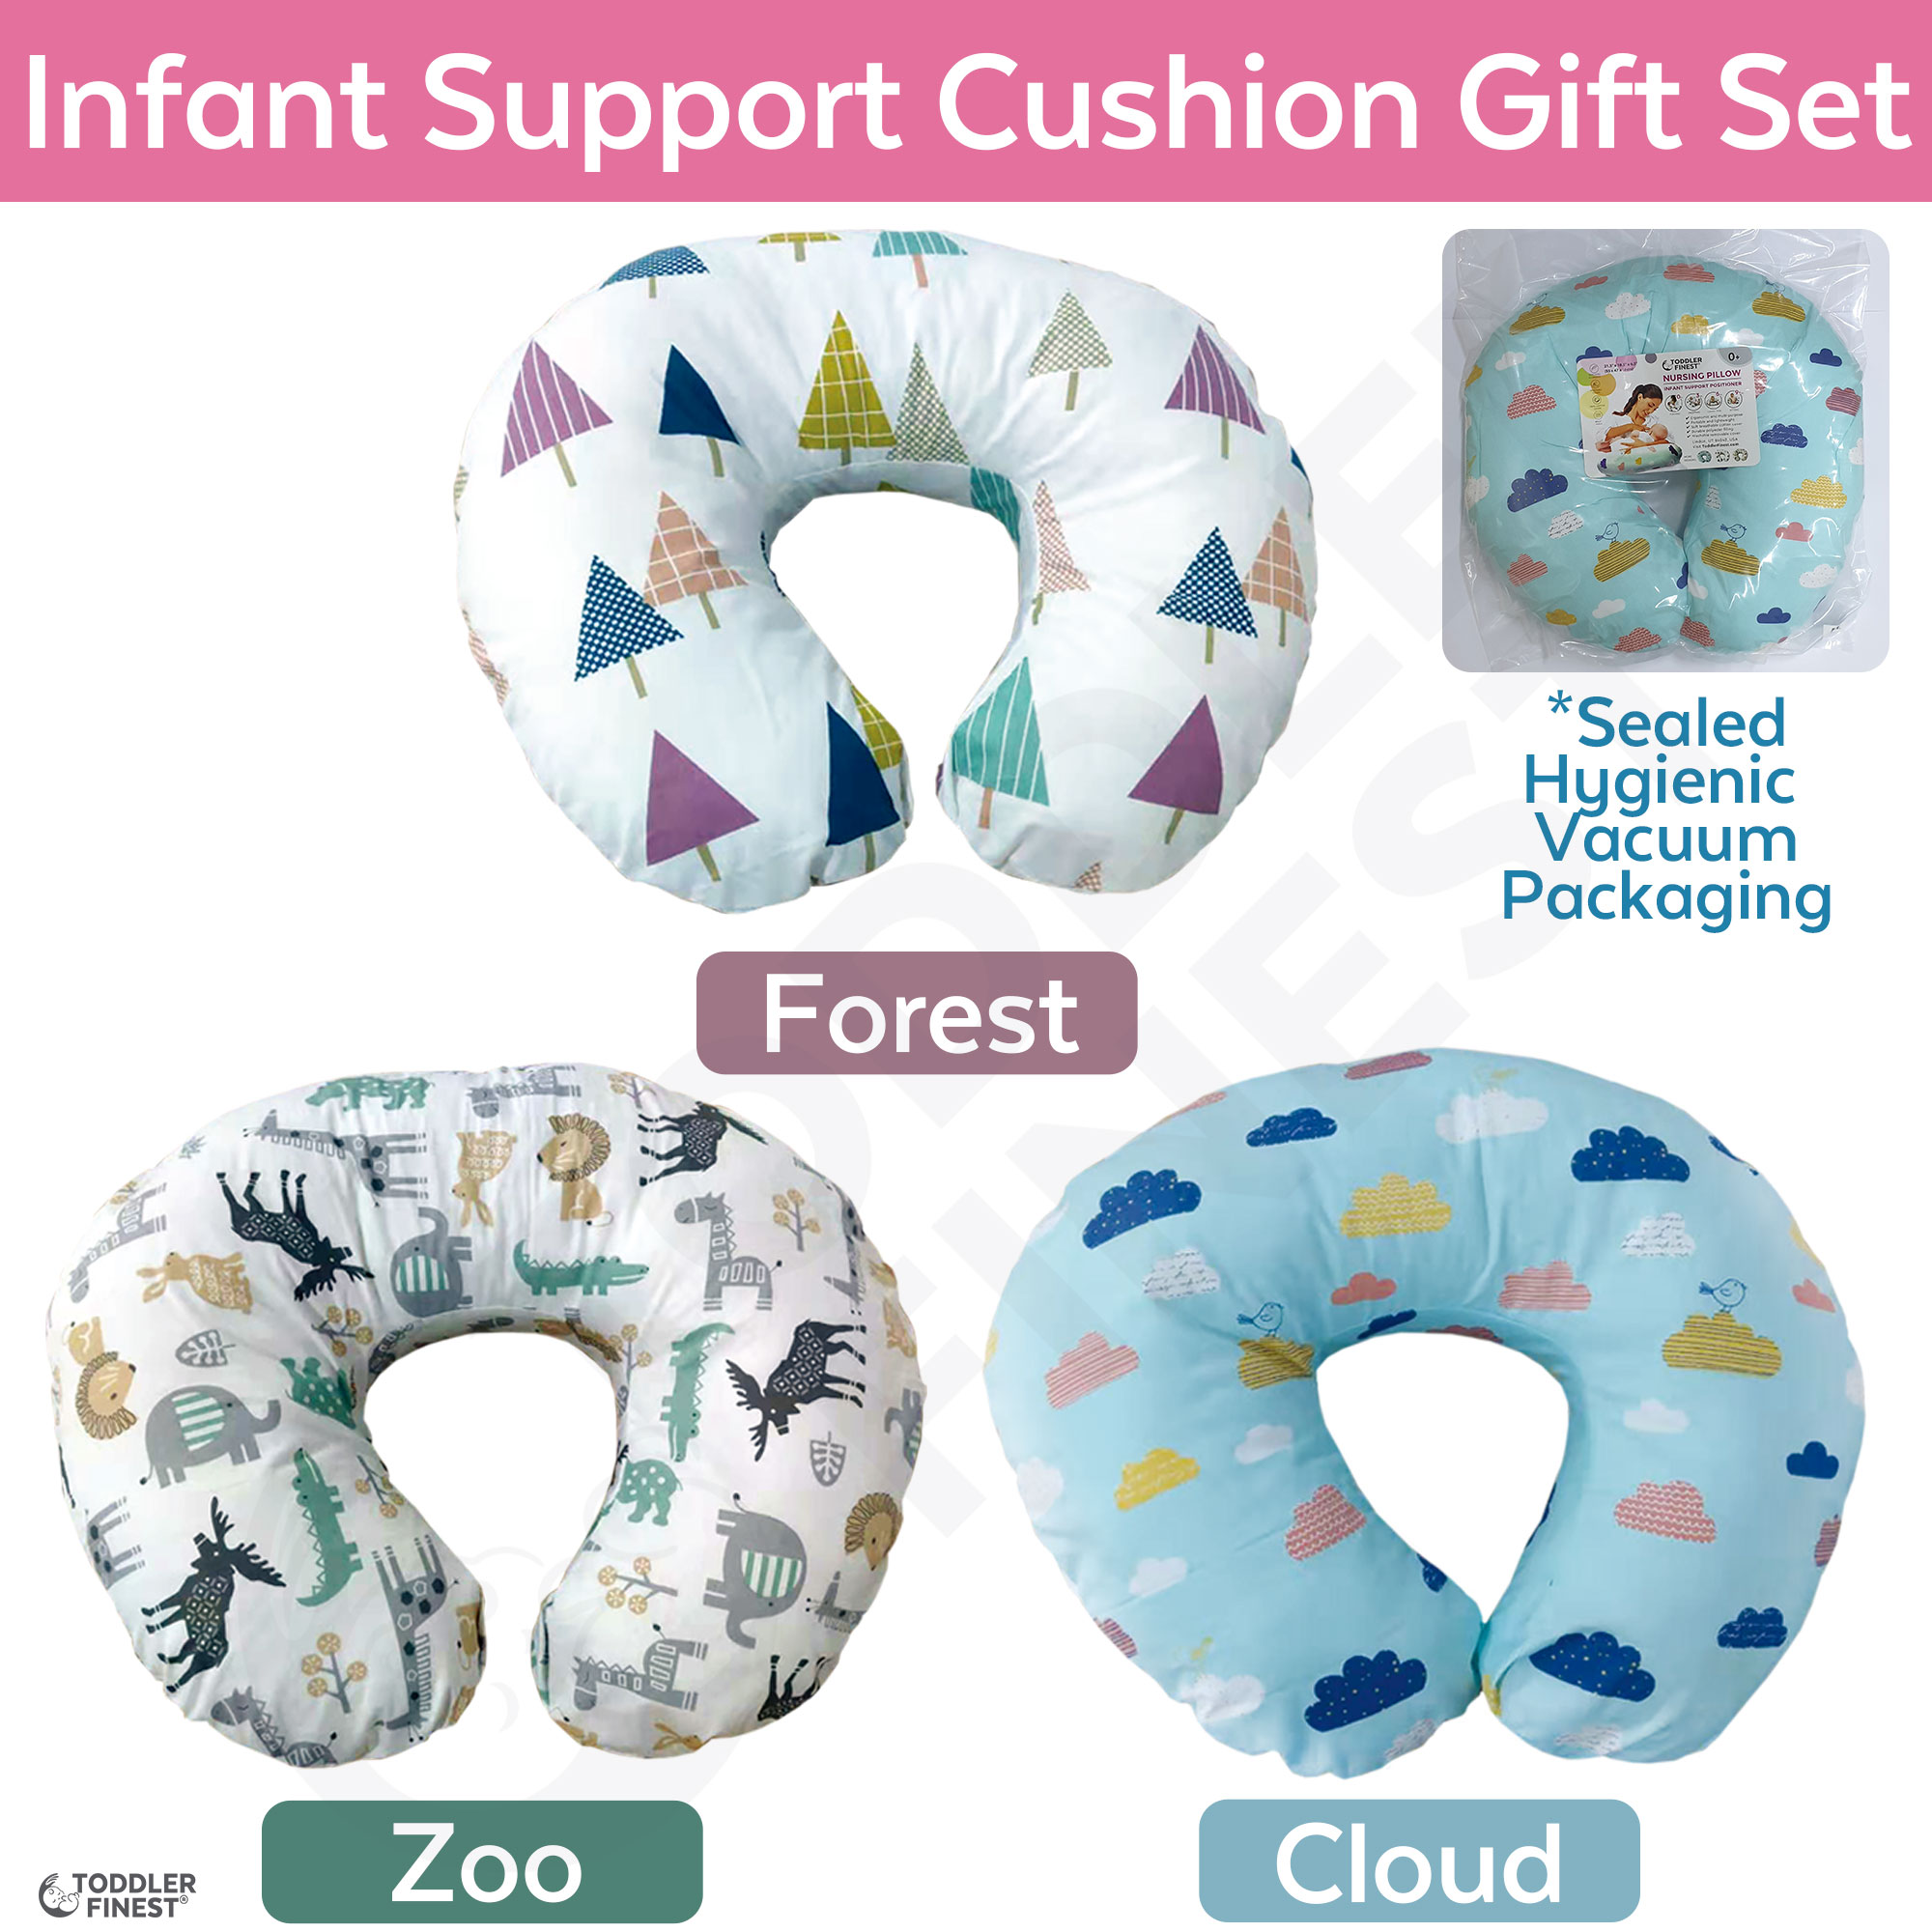 Bacati - 3 PC Space Multicolor Hugster Feeding & Infant Support Nursing Pillow